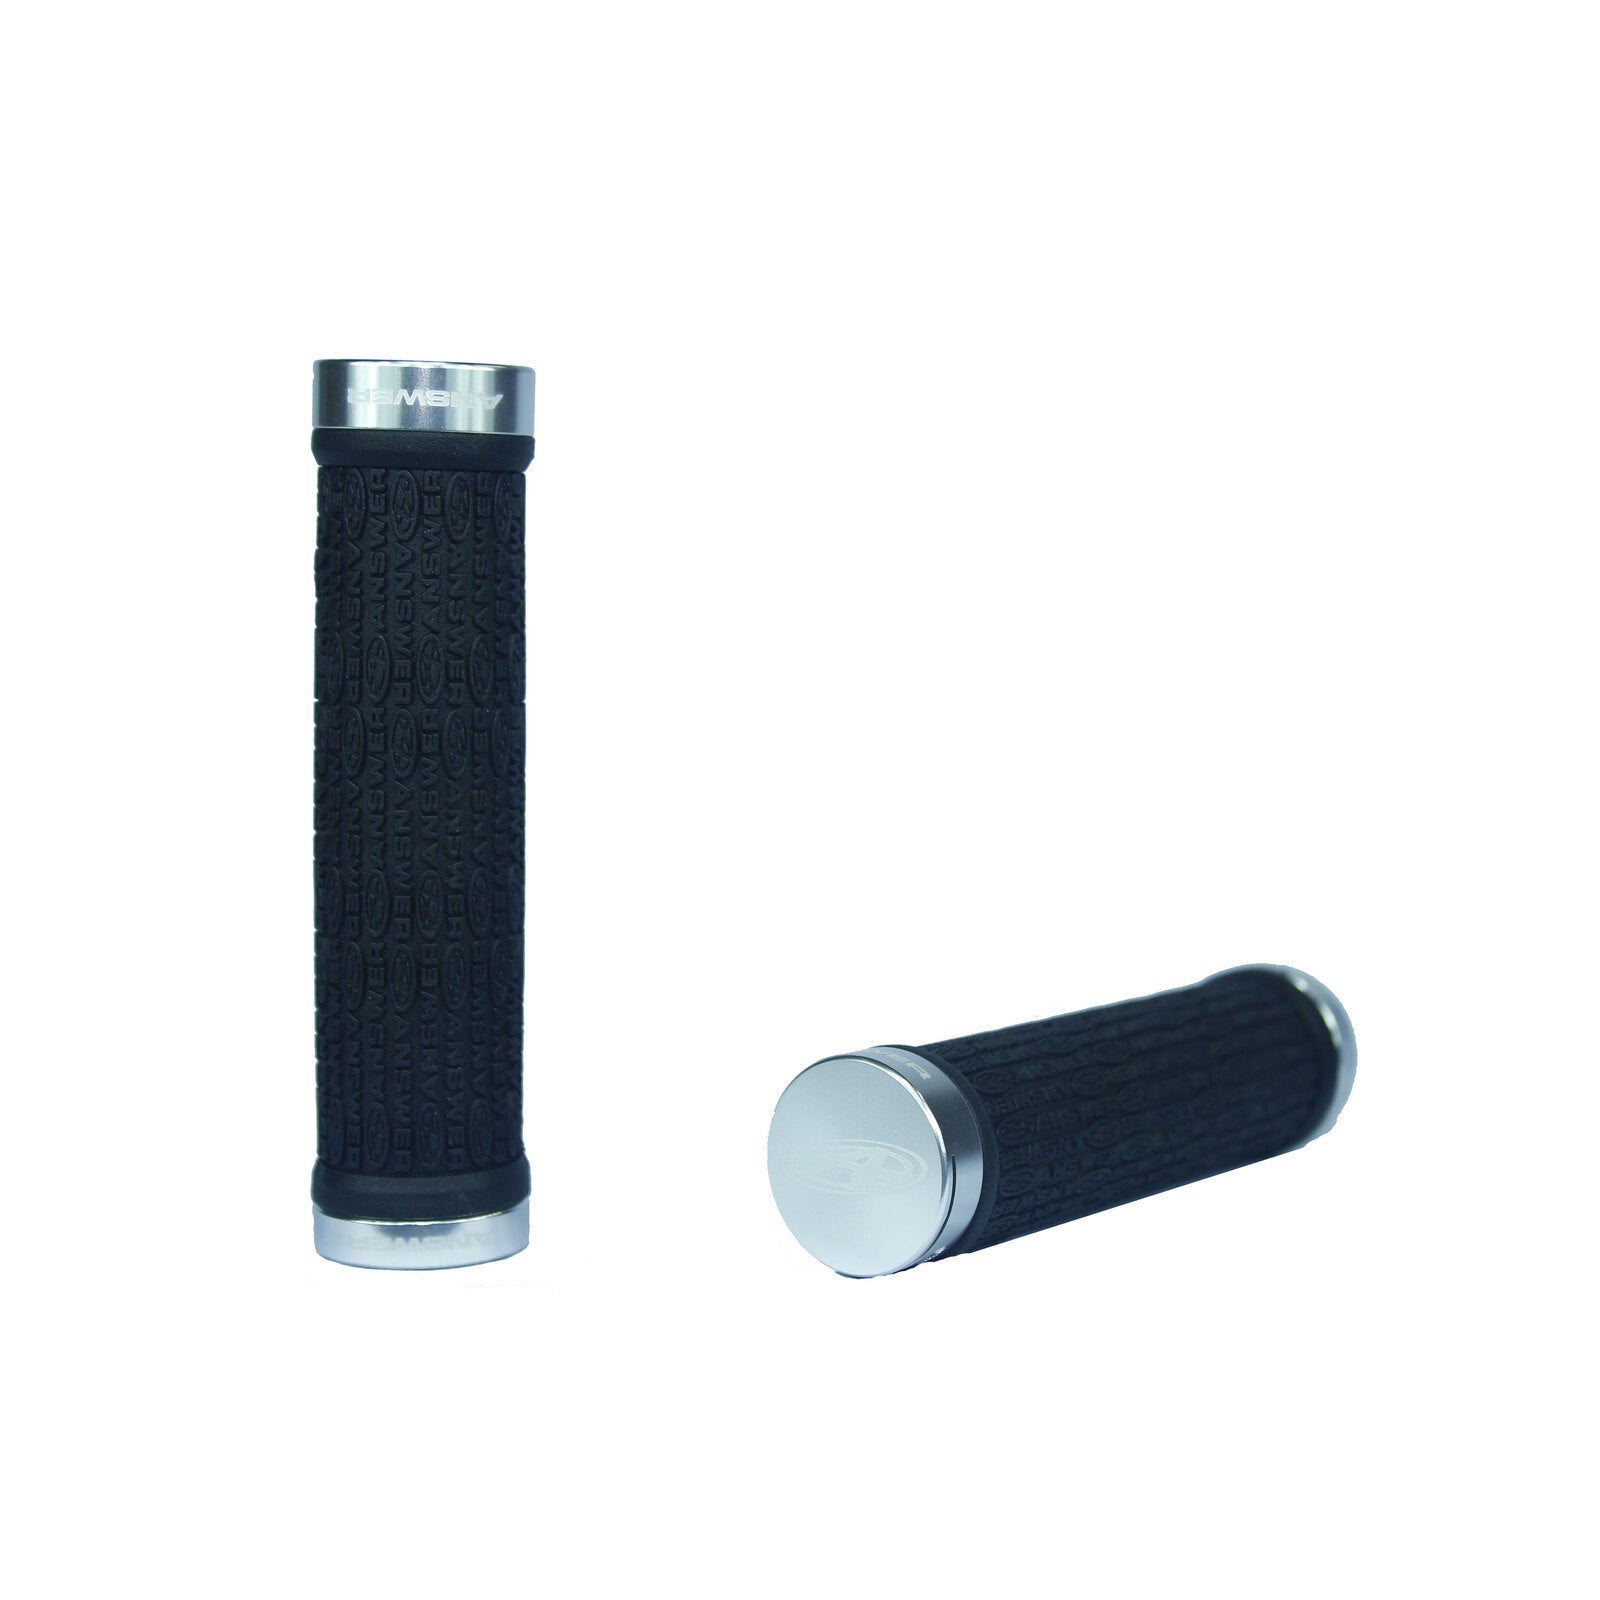 A pair of Answer Pro Lock-On Flangless Grips with a black rubber texture on a white background.